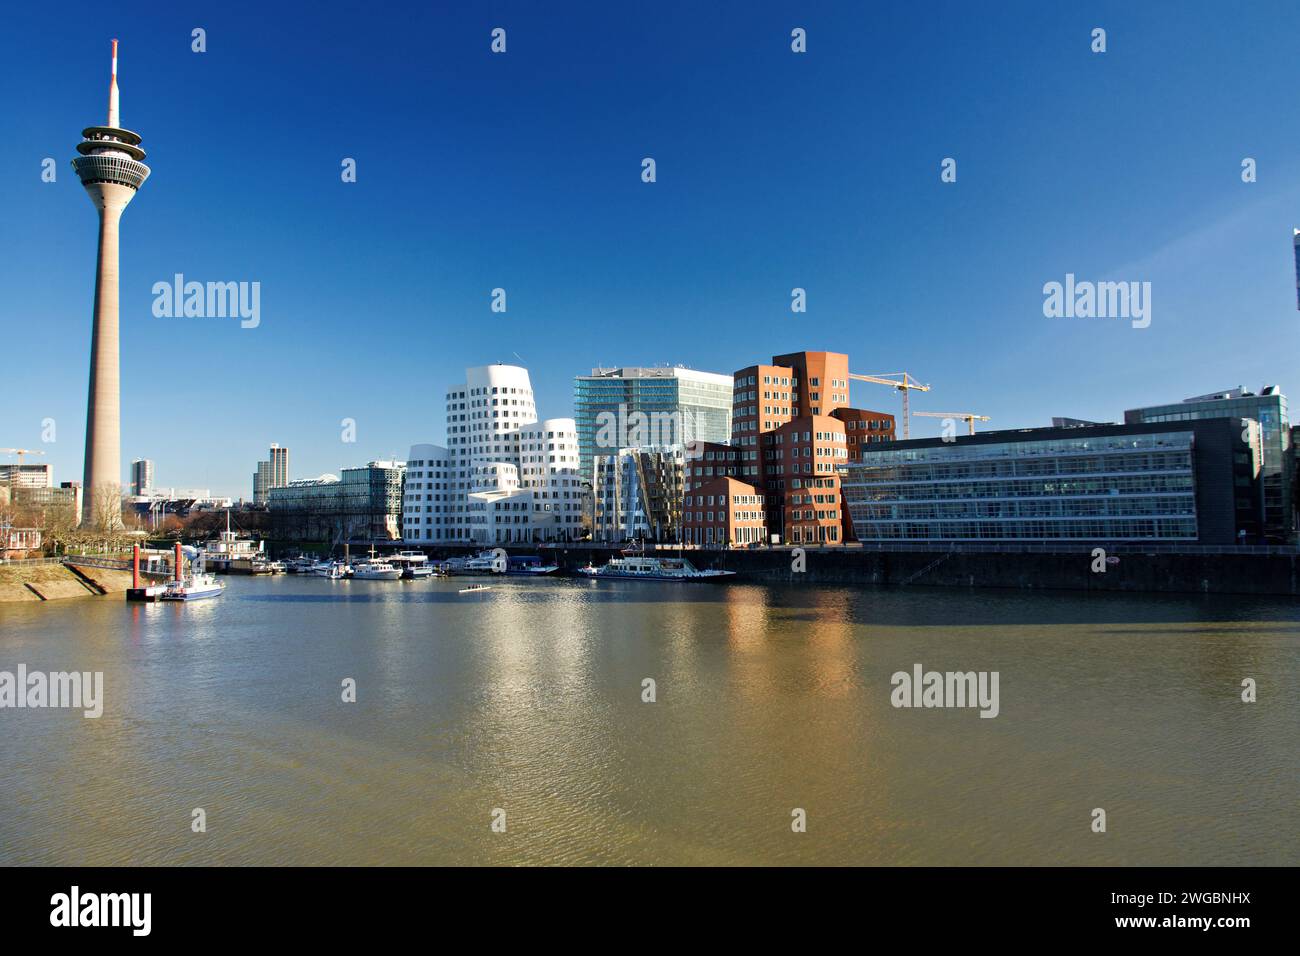 The media harbor in Düsseldorf is an up-and-coming district in which numerous media companies have settled Stock Photo